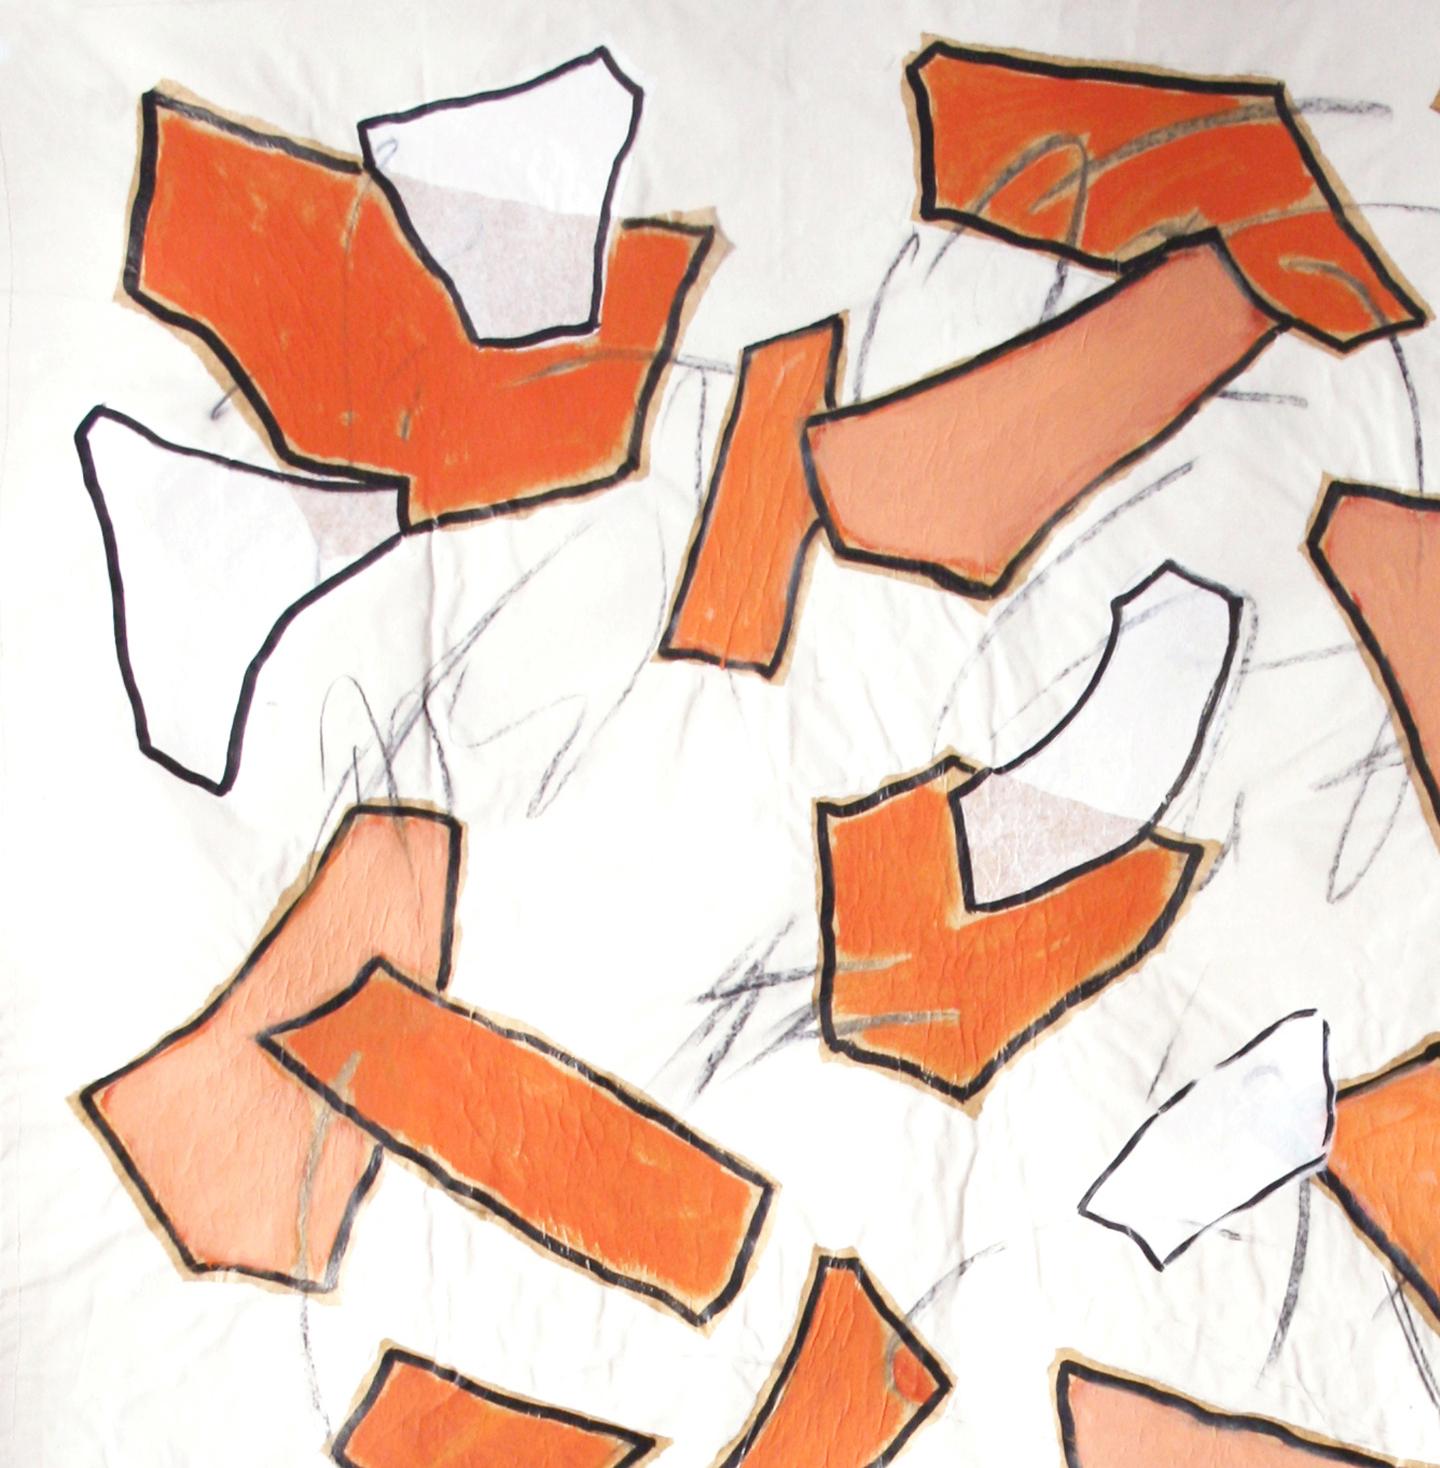 Contemporary Nathalie Fontenoy French Artist, Paper Collage, Fragment # 4, Orange Suite